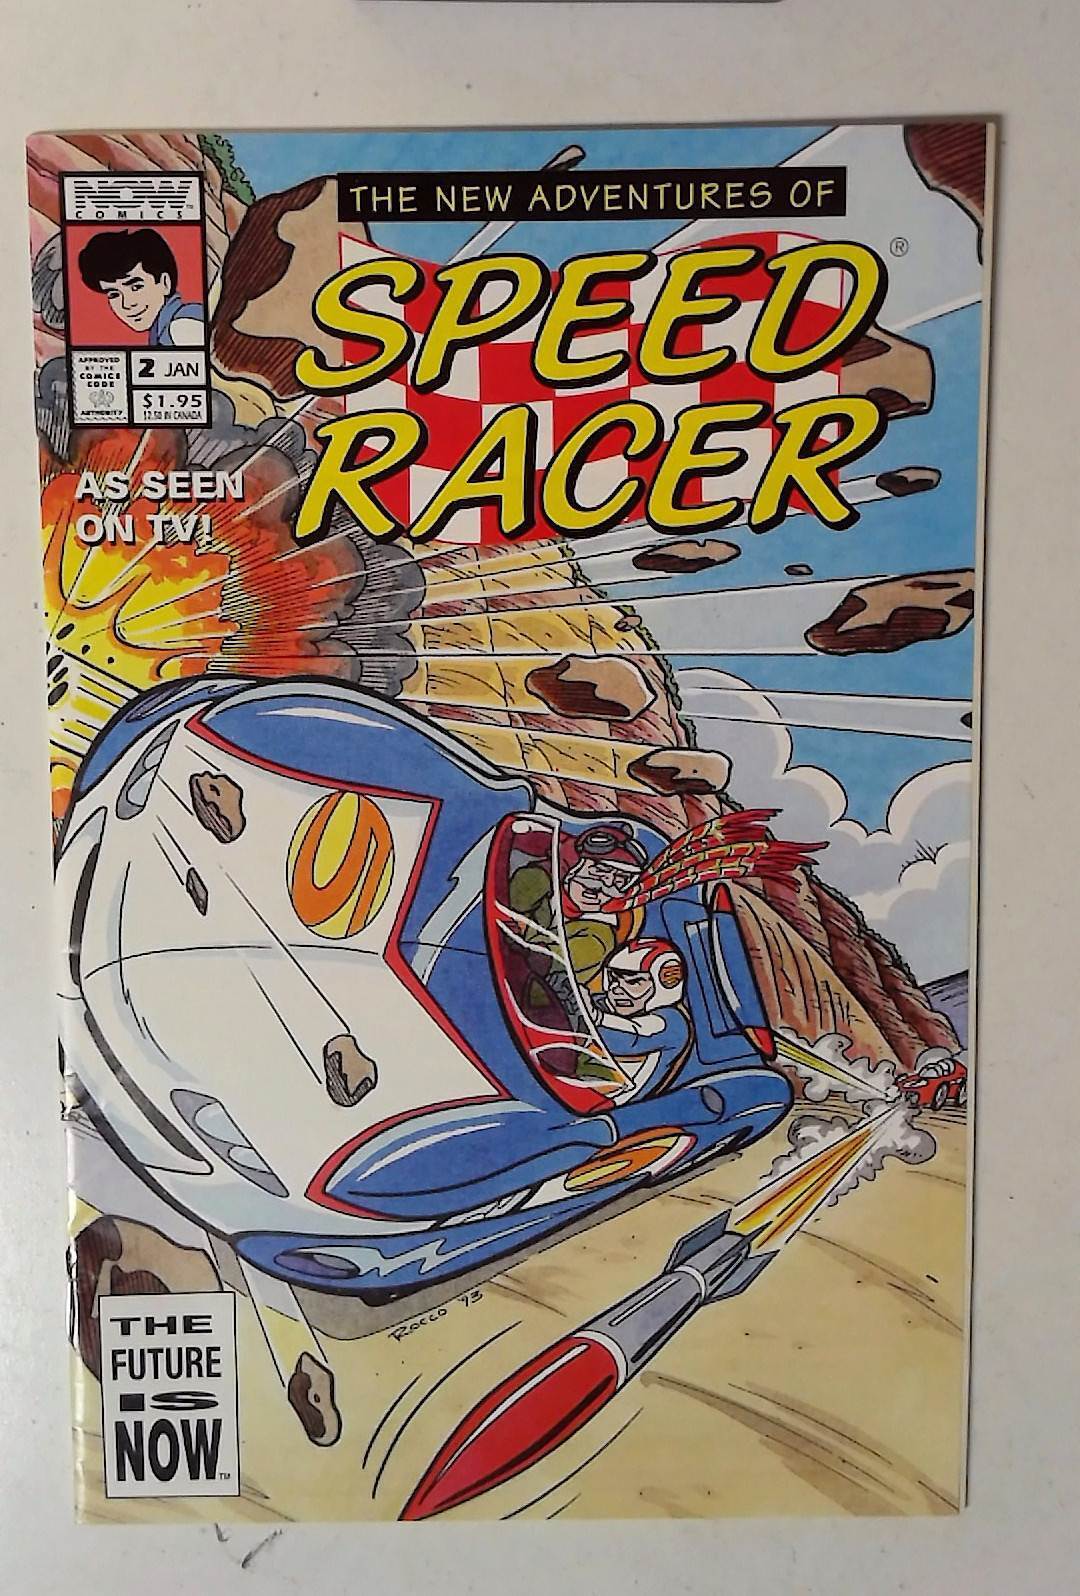 The New Adventures of Speed Racer #2 Now Comics (1994) VF+ 1st Print Comic Book